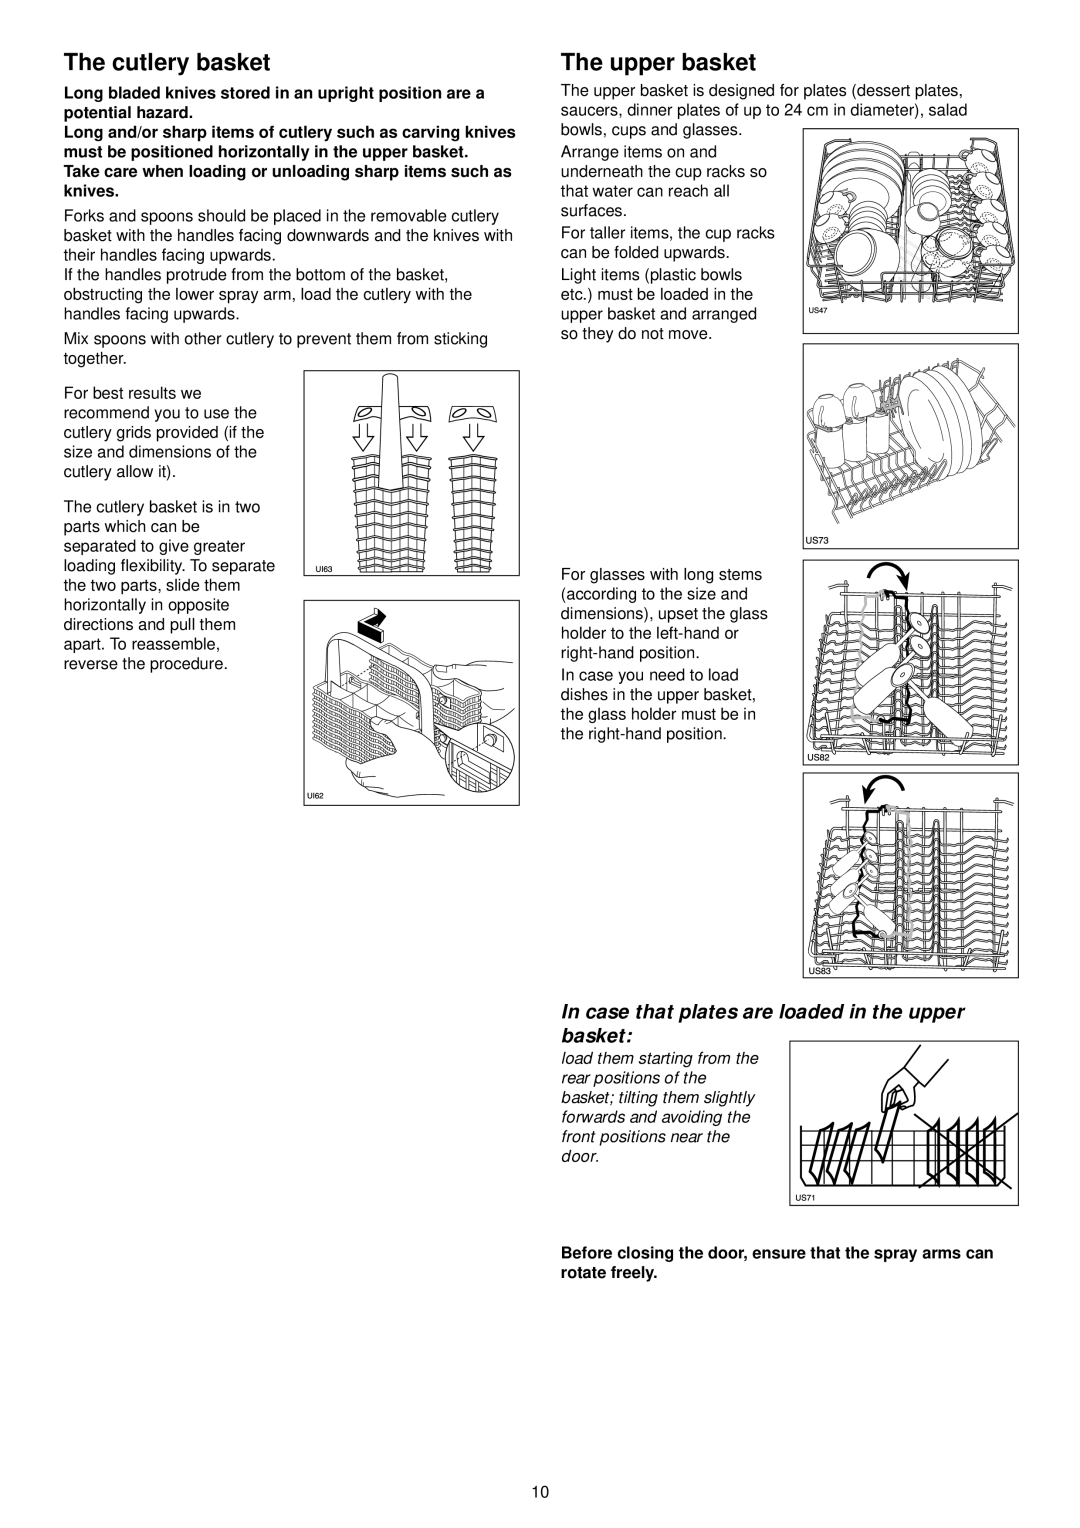 Zanussi ZDF 601 manual The cutlery basket, The upper basket, In case that plates are loaded in the upper basket 